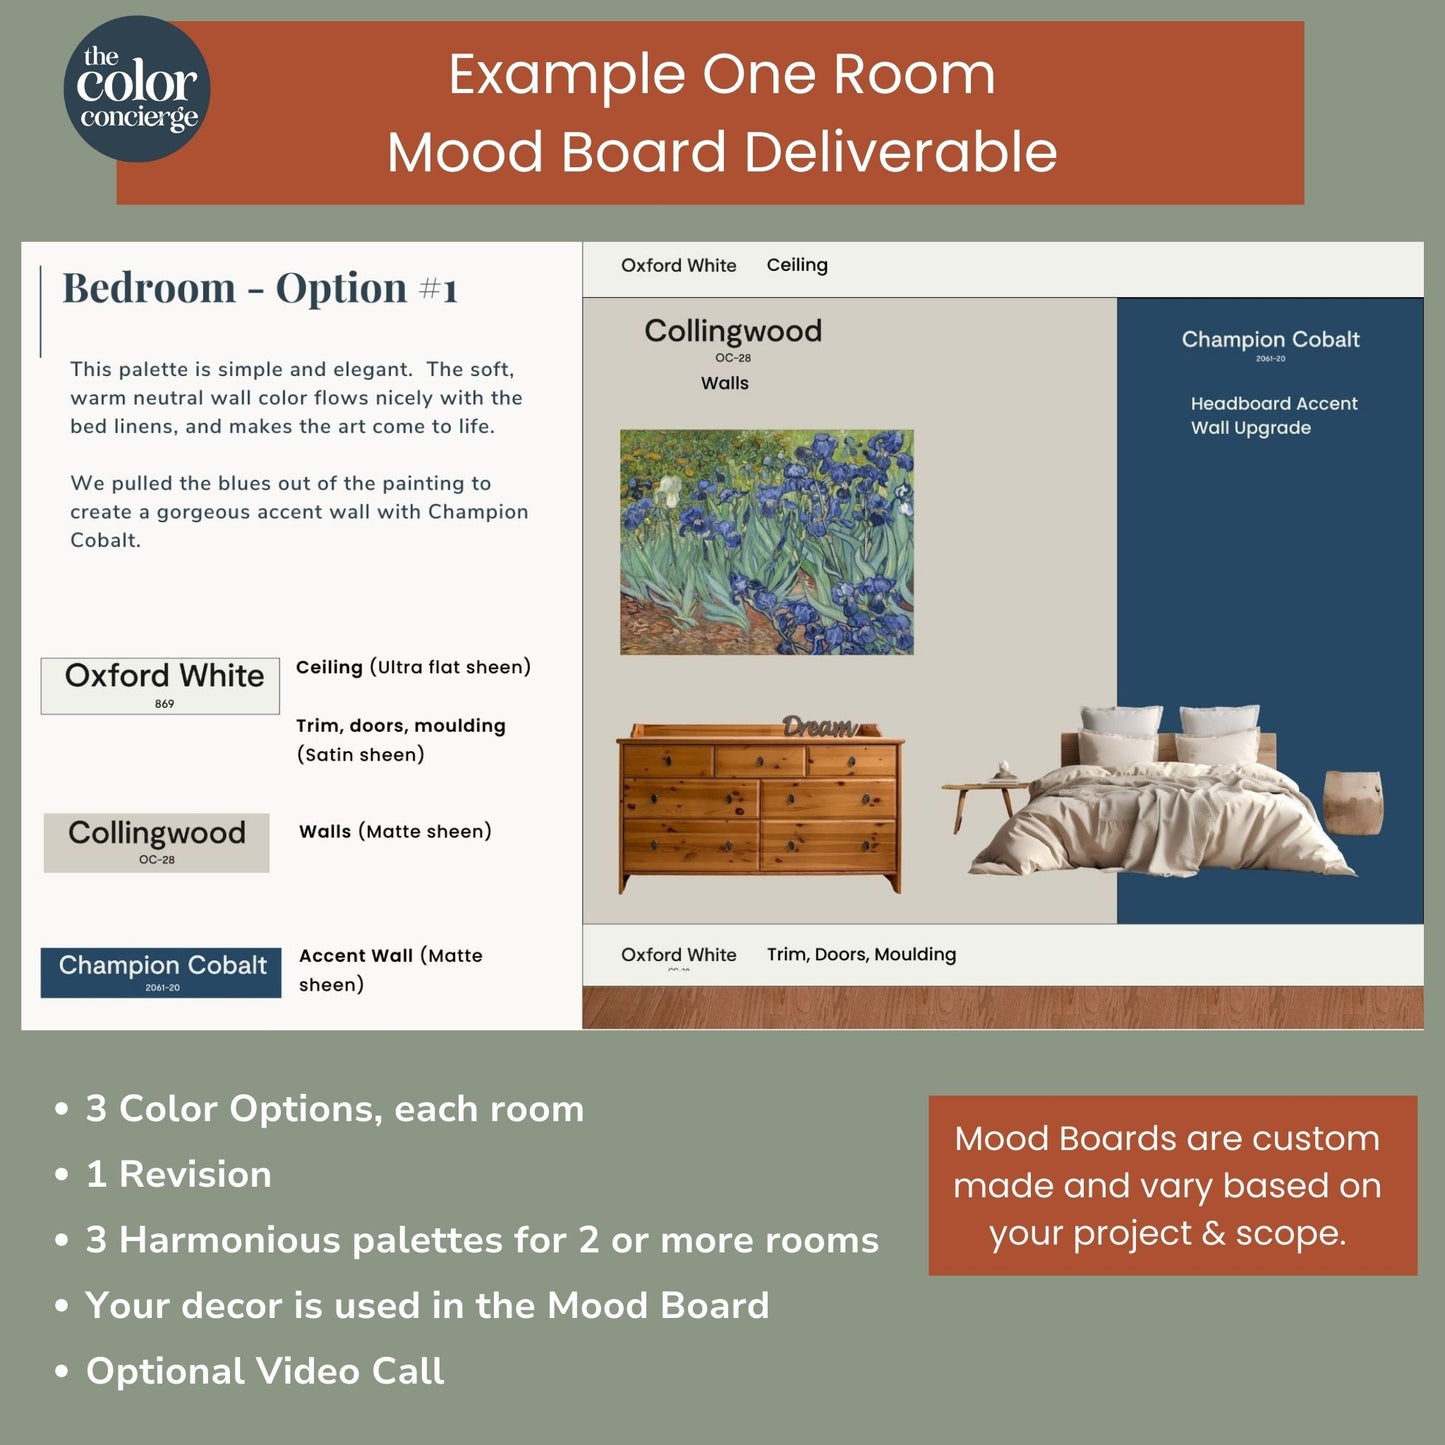 One or More Rooms